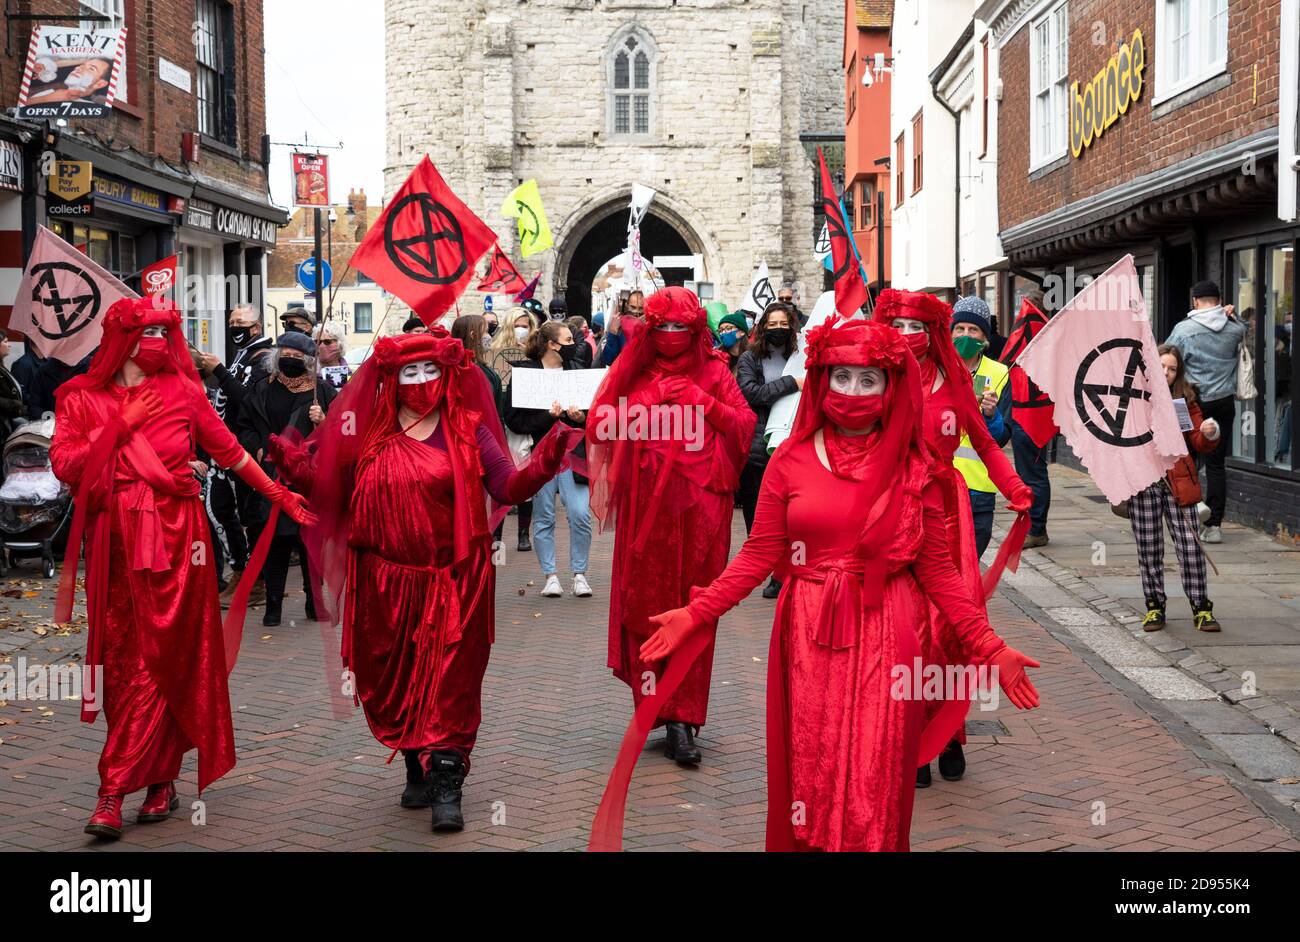 Canterbury, UK. 31st October 2020. Extinction Rebellion Procession led by the Red Rebels via Westgate Towers through the centre of Canterbury along the pedestrianised High Street. A new Day of the Dead spectacle in the city involving music, skeletal animals, and the mourning and solace of the Red Rebels. XR say there is a need to call on the government and institutions to Tell The Truth about the climate and ecological crises that we are in and Act Now and get behind the CEE bill. Hosted by Extinction Rebellion Canterbury and Extinction Rebellion Southeast UK. Credit: Stephen Bell/Alamy Stock Photo